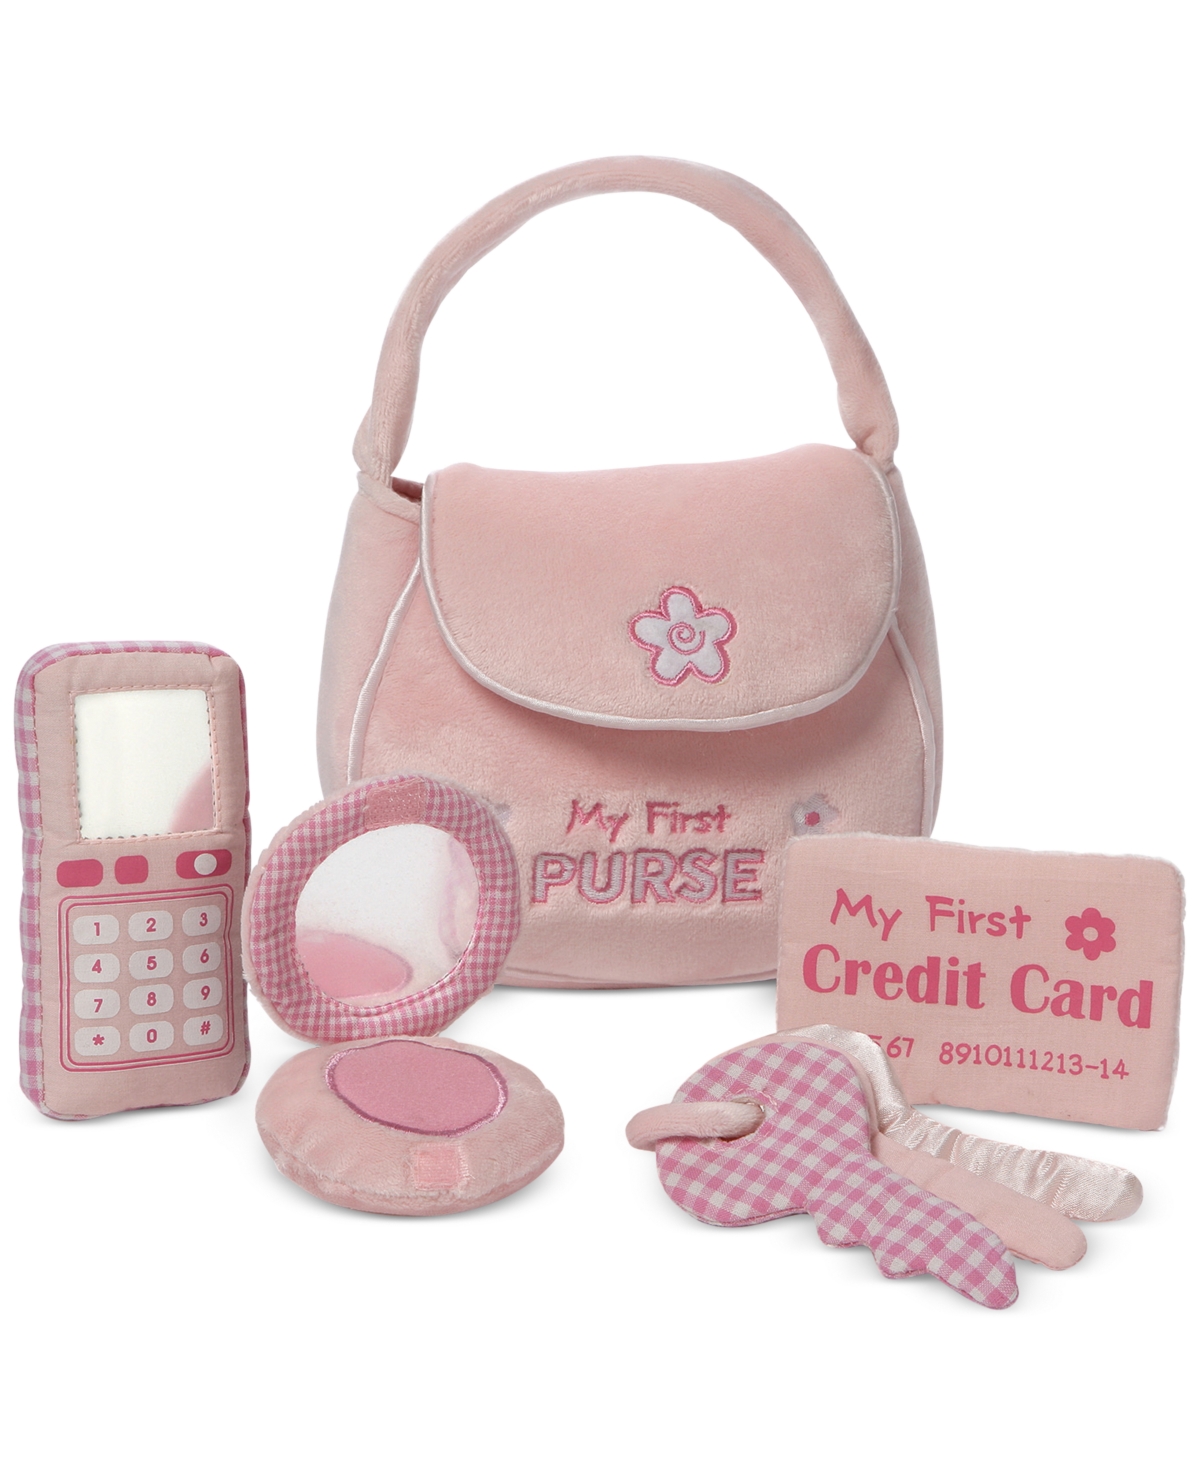 UPC 028399071555 product image for Gund Baby My First Purse Playset Toy | upcitemdb.com